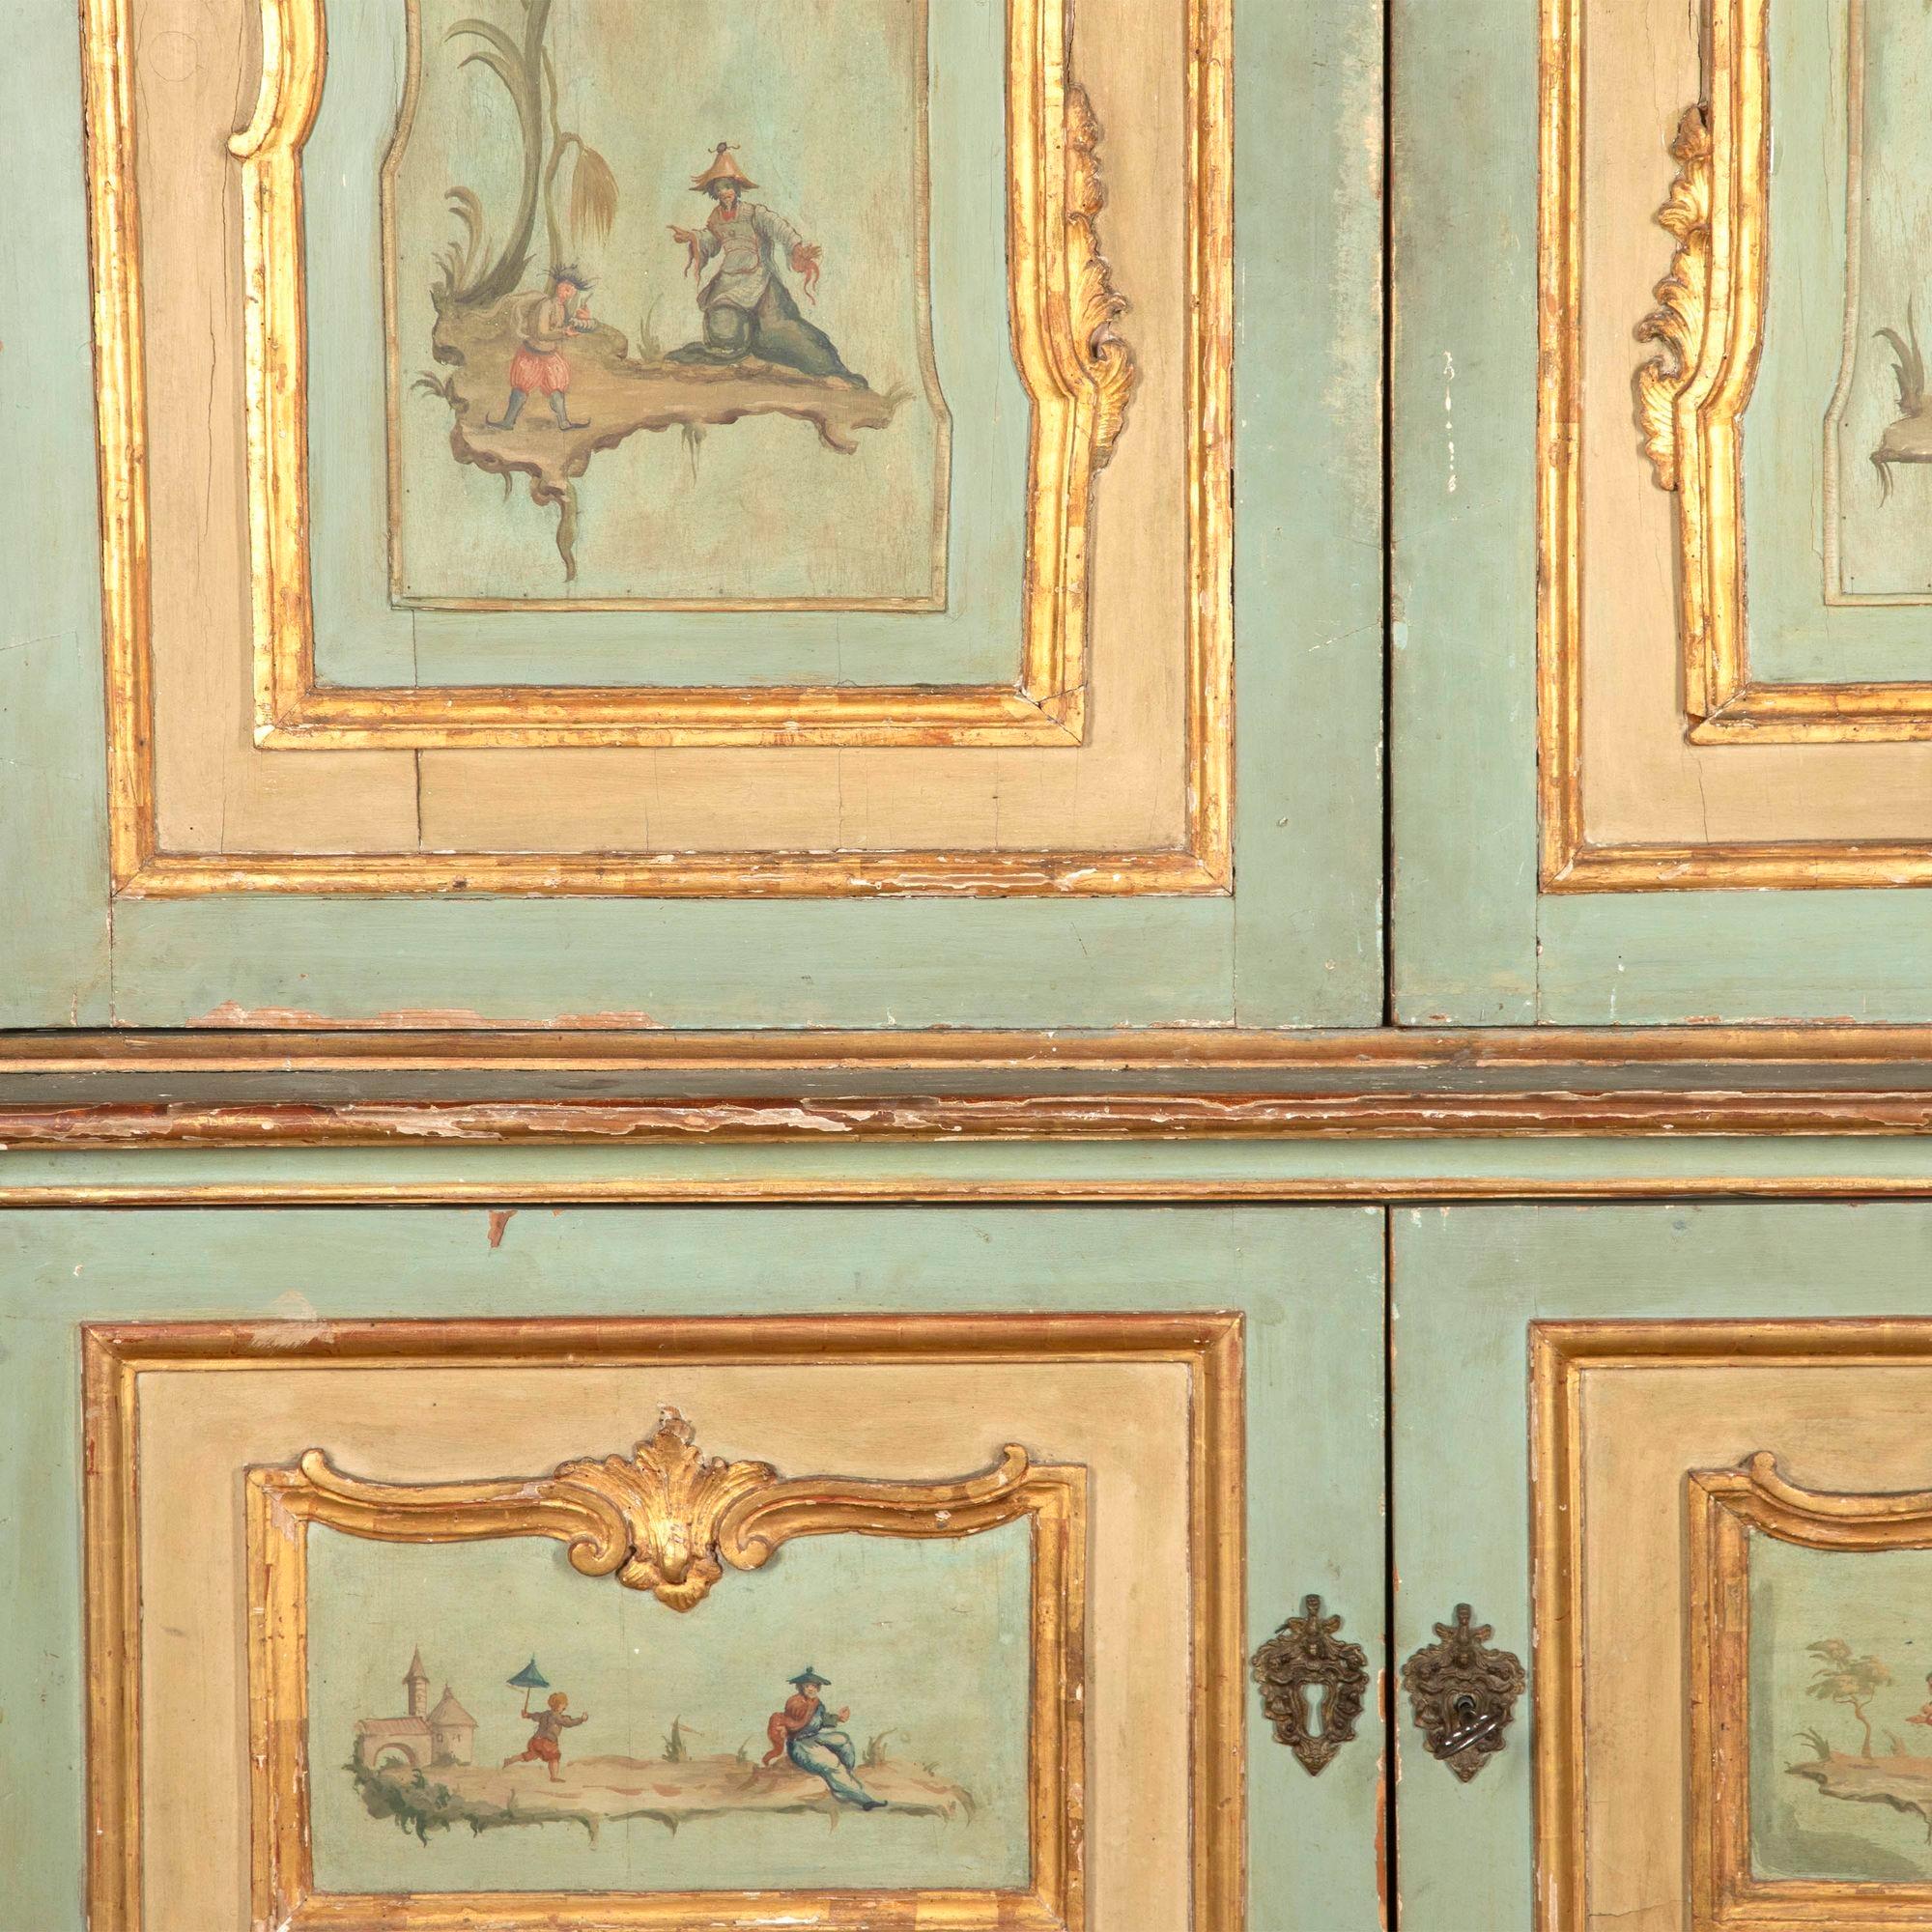 Early 19th Century Italian four-door painted cupboard of 'palazzi' proportions with original green paint.
In carved giltwood mounts and hand-painted chinoiserie. The base is one piece and the top dismantles.
With signs of wear, commensurate with